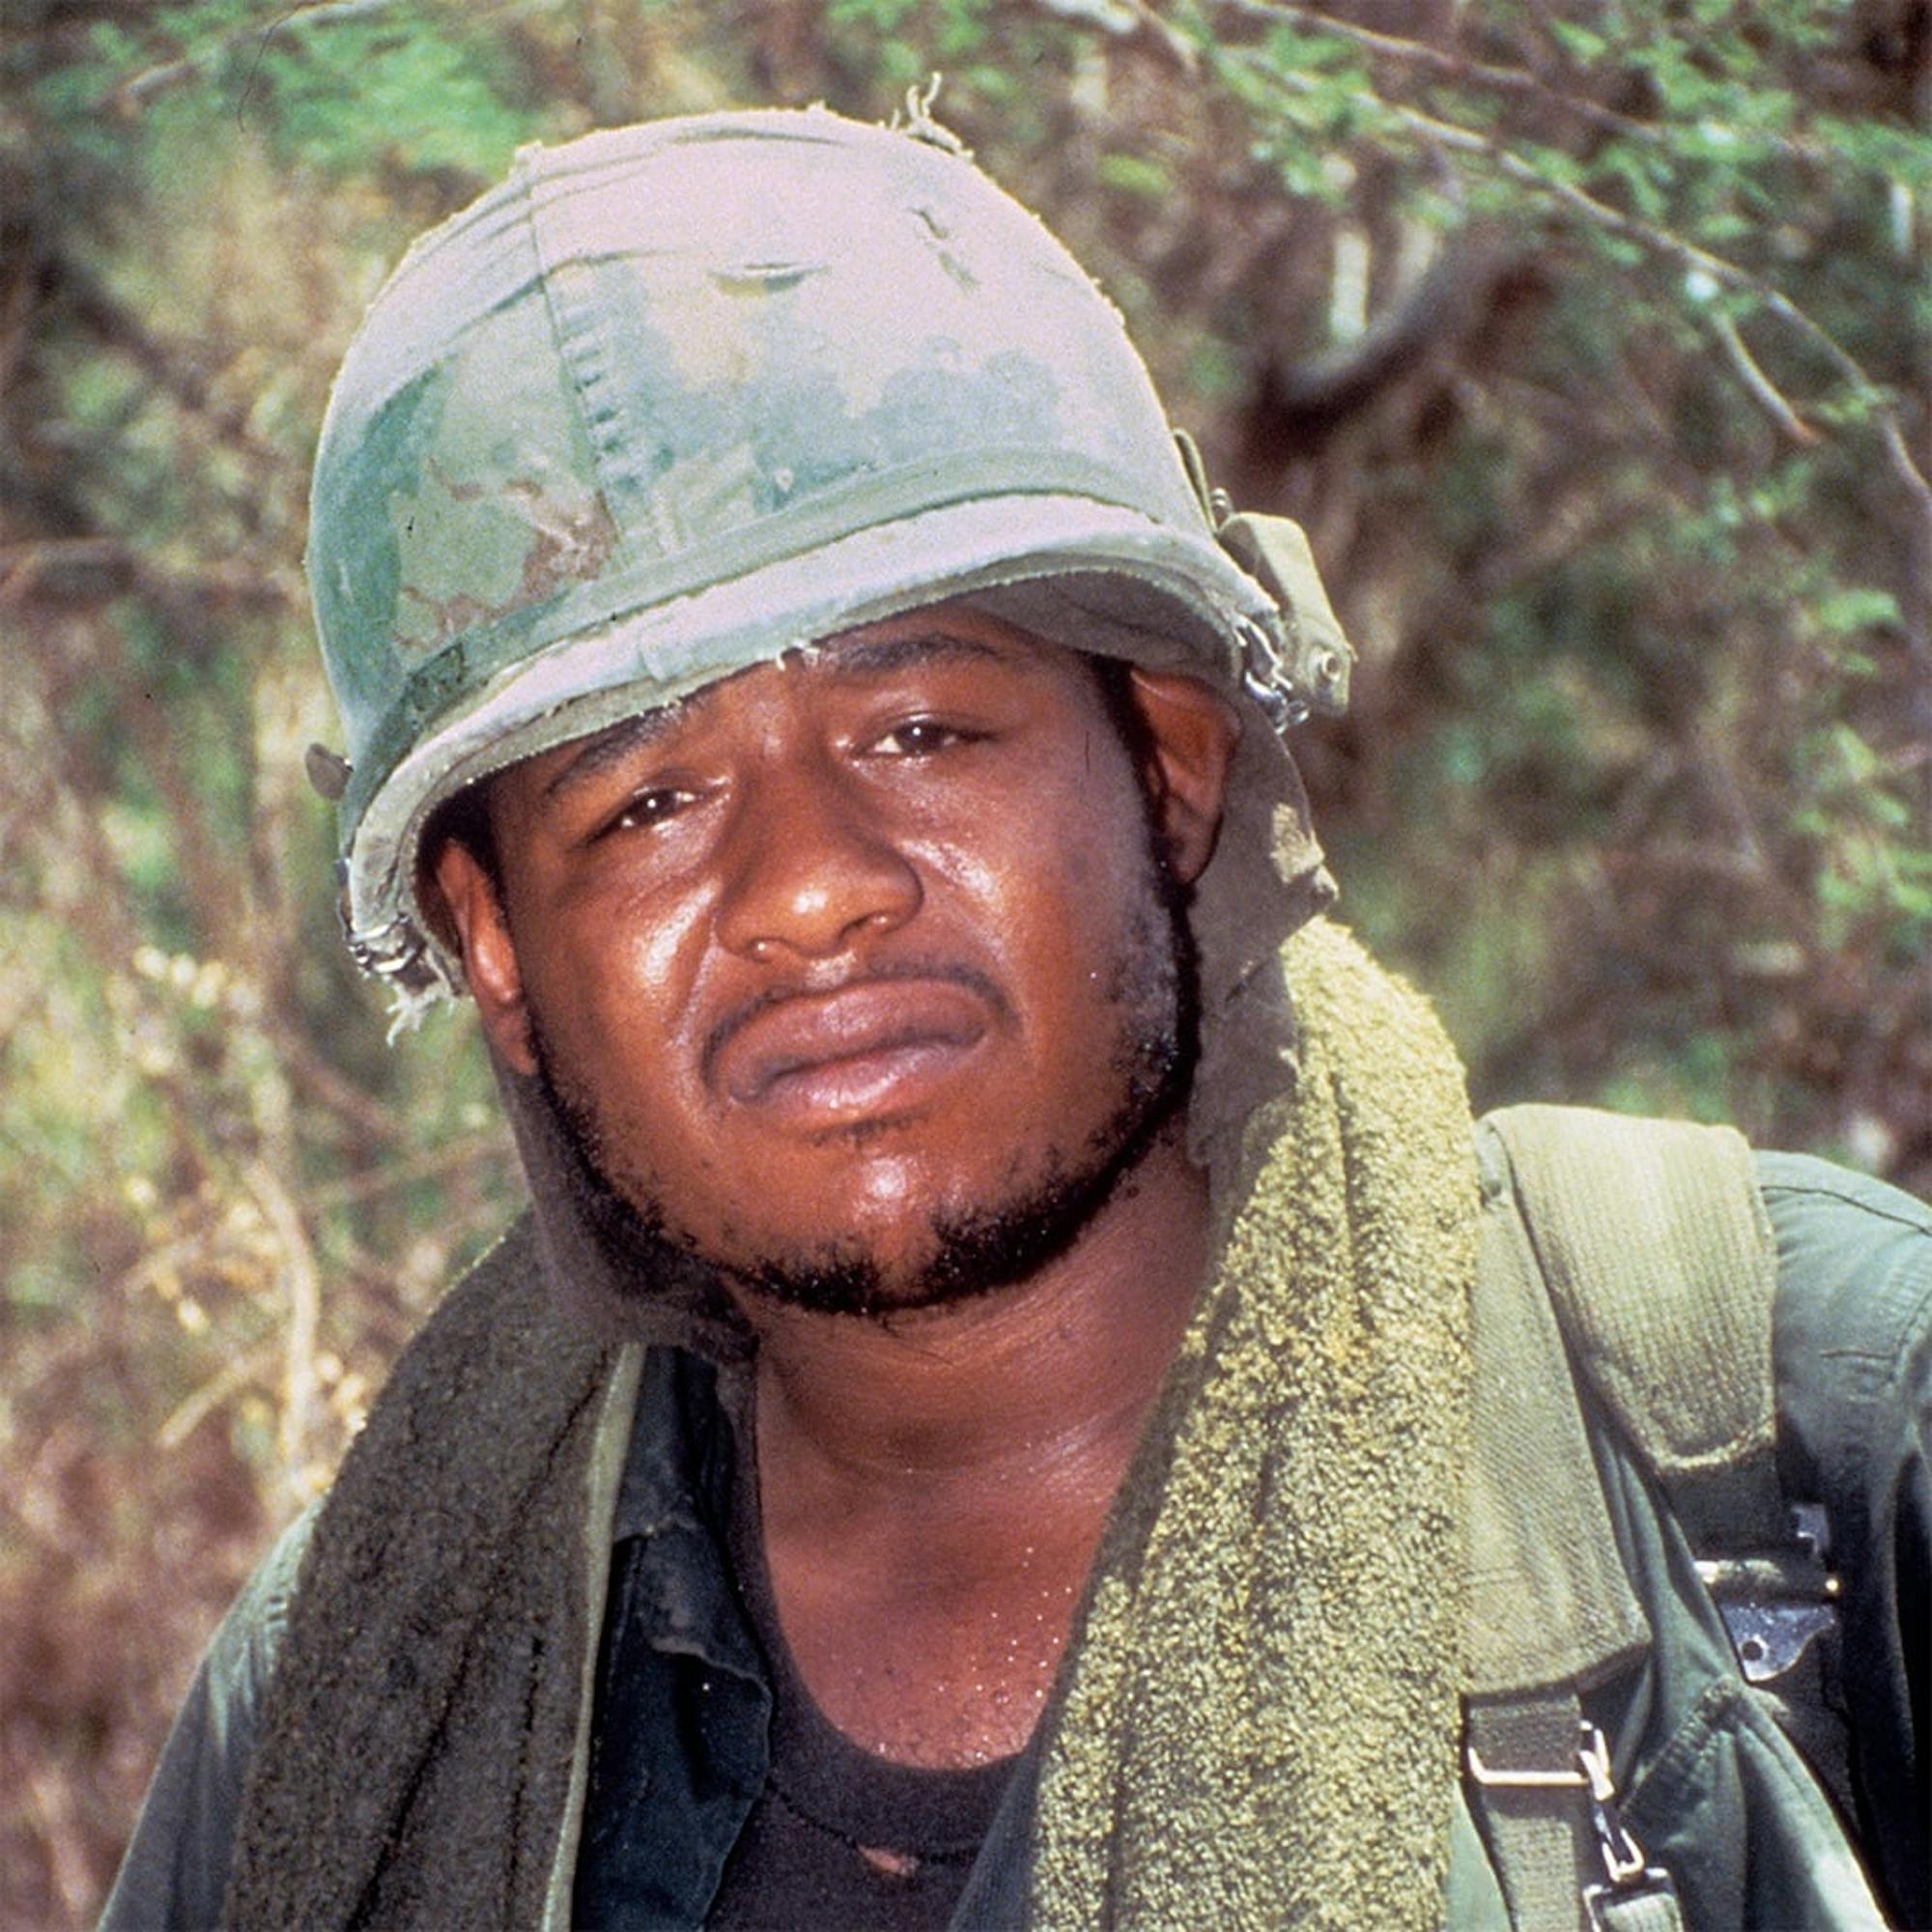 Forest Whitaker on set as Big Harold in Platoon